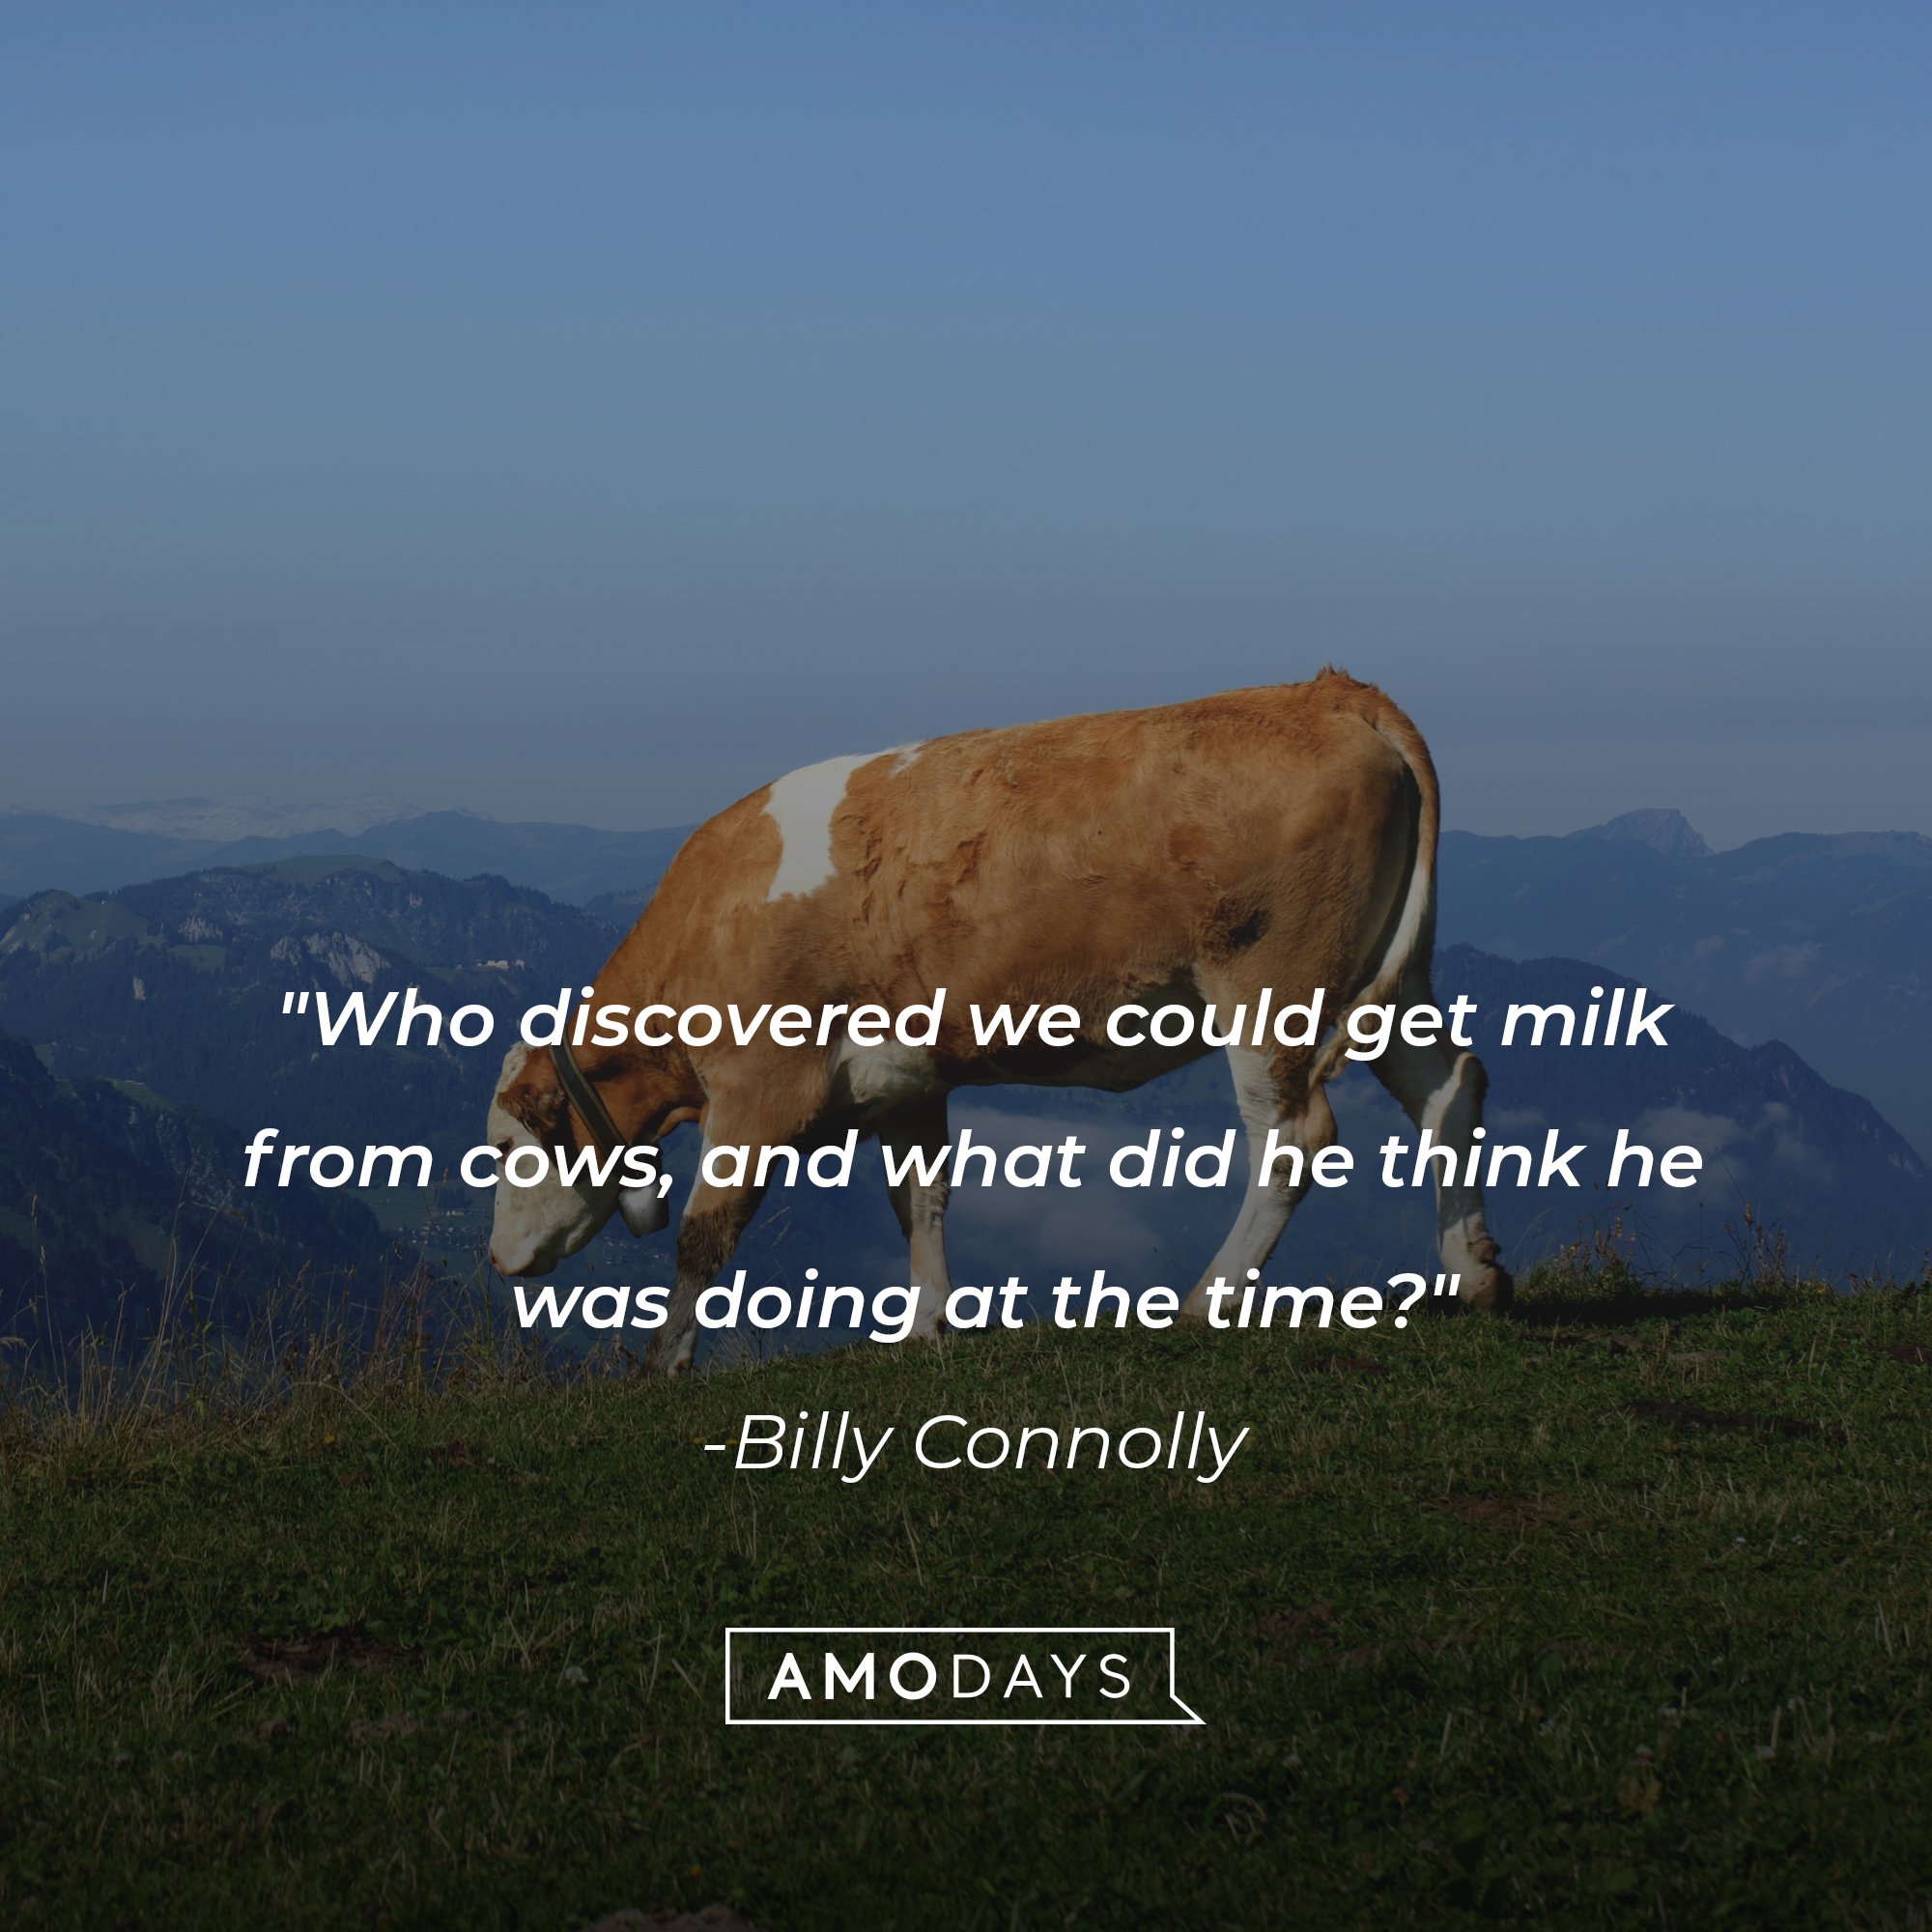 Billy Connolly’s quote: "Who discovered we could get milk from cows, and what did he think he was doing at the time?" | Image: AmoDays